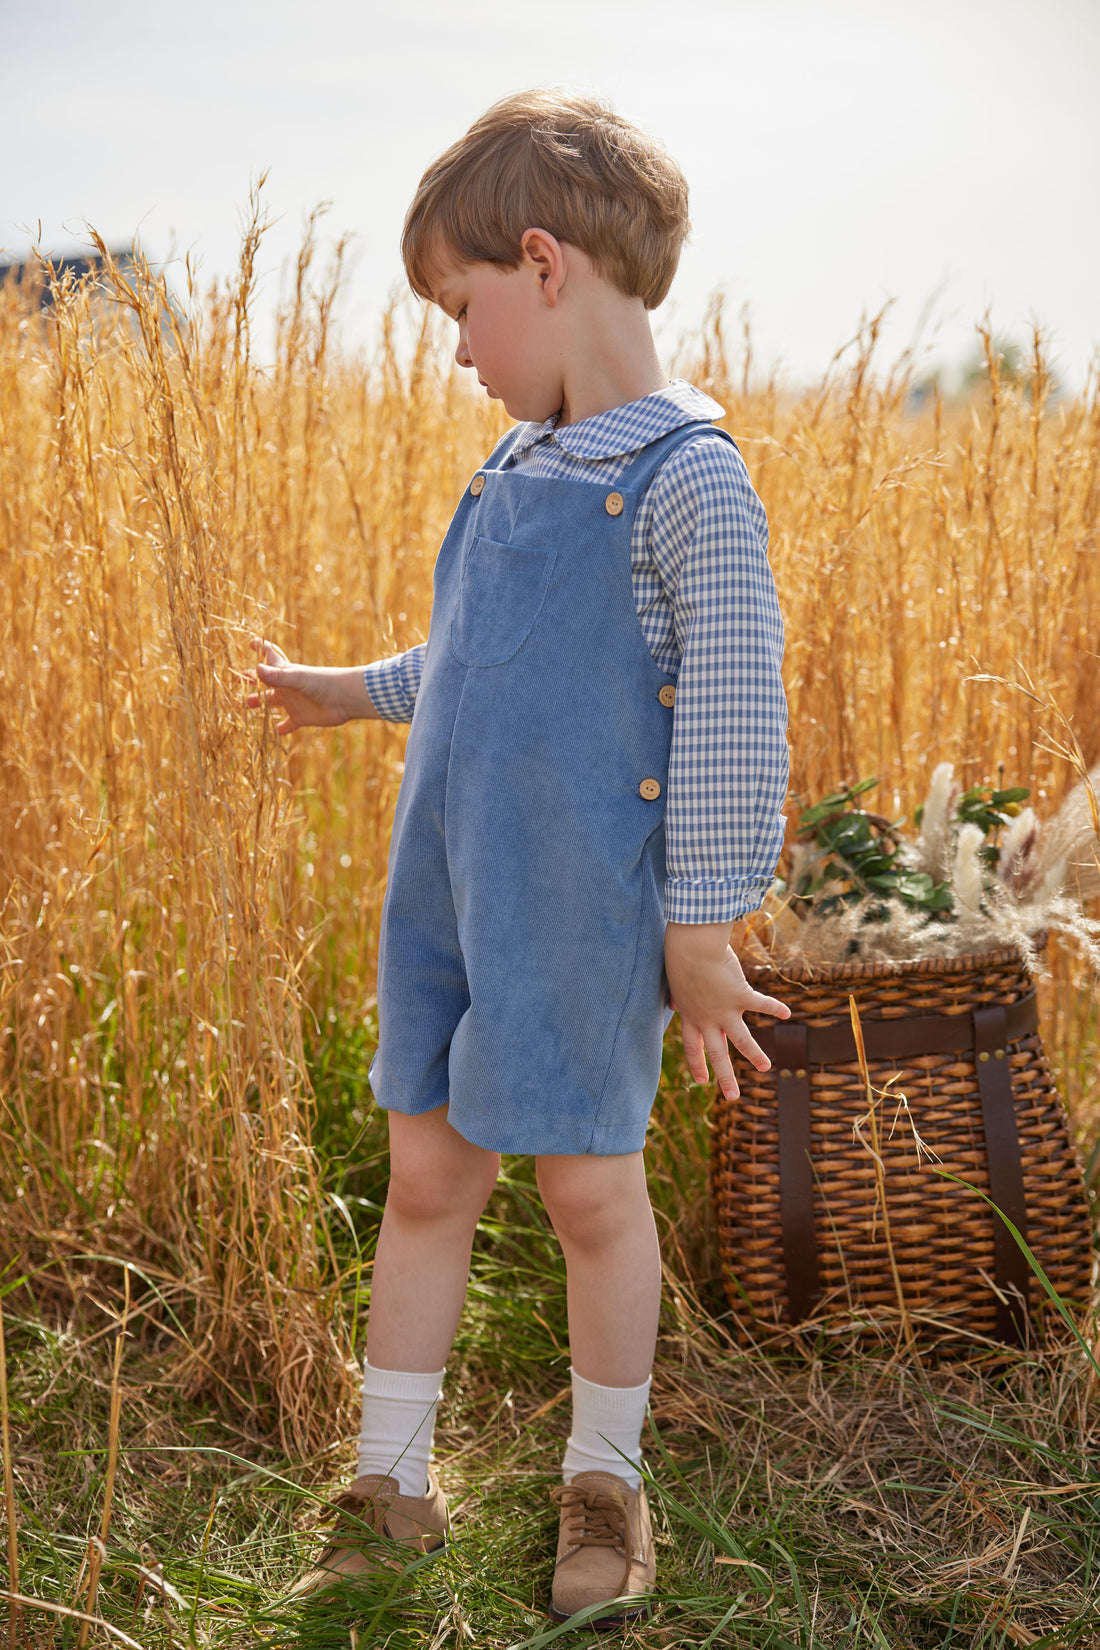 little english classic childrens clothing tween boys gray blue corduroy shortall with wooden buttons